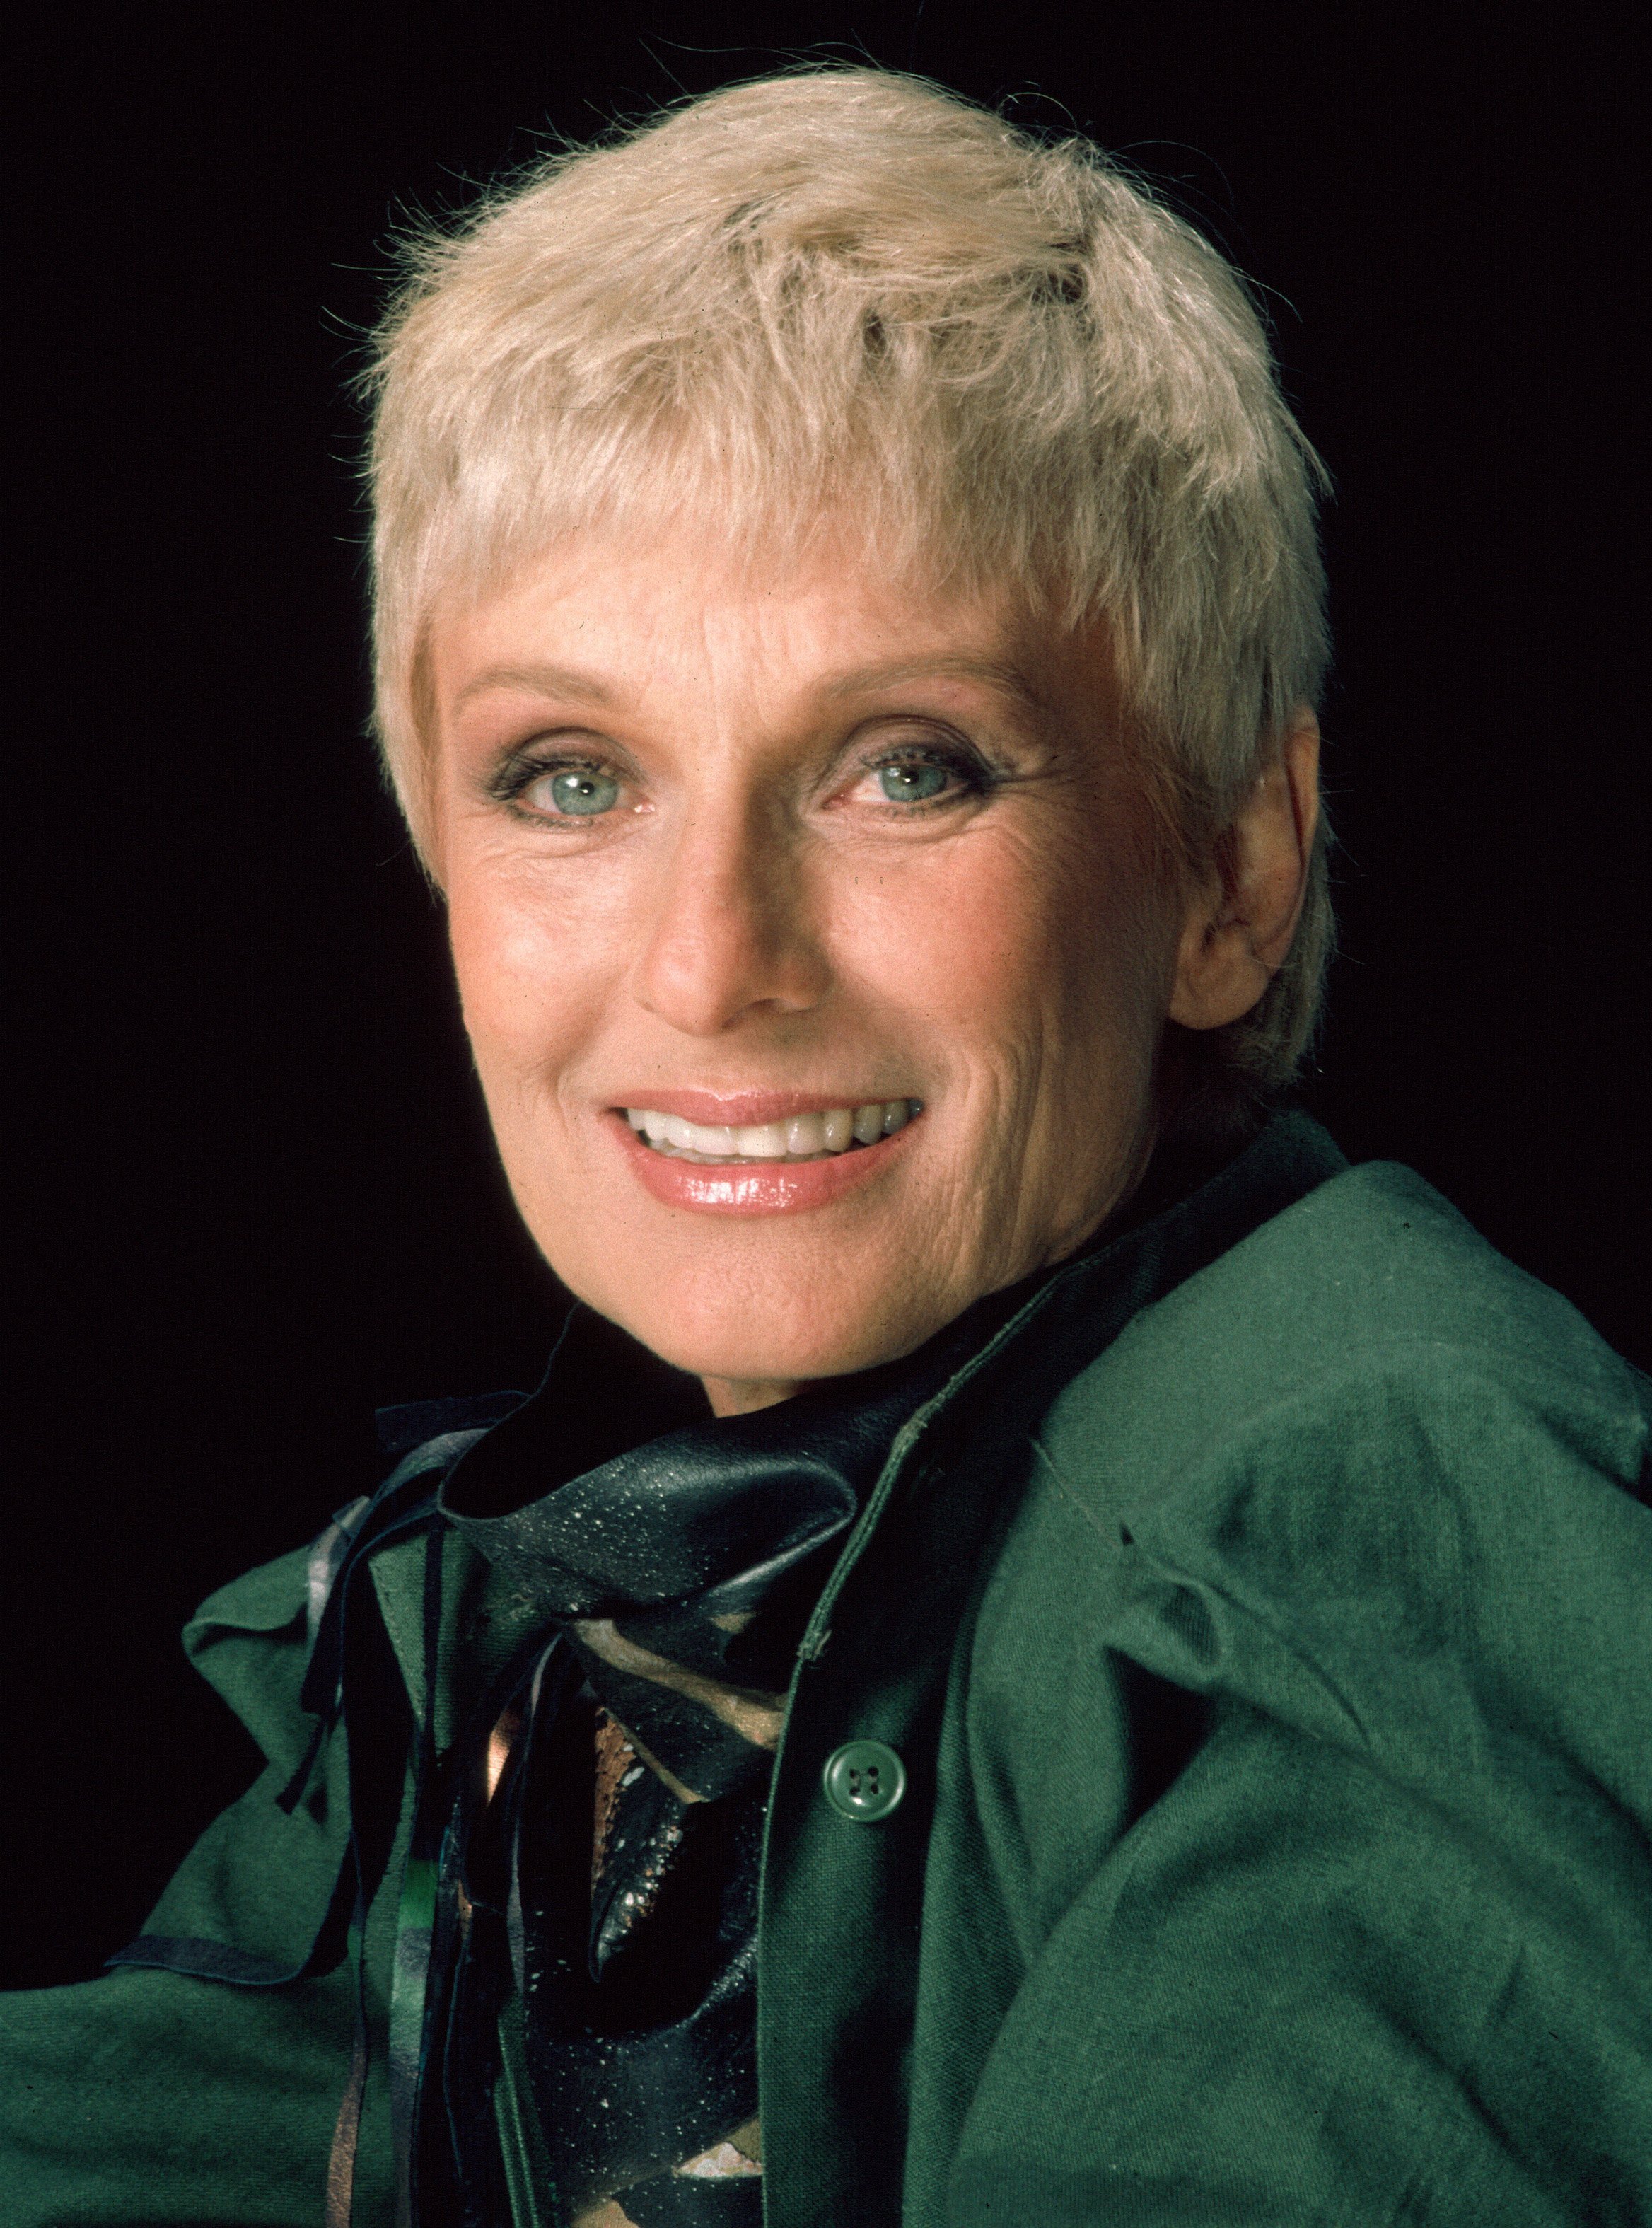 Cloris Leachman posing for a portrait in 1982 in Los Angeles, California. / Source: Getty Images